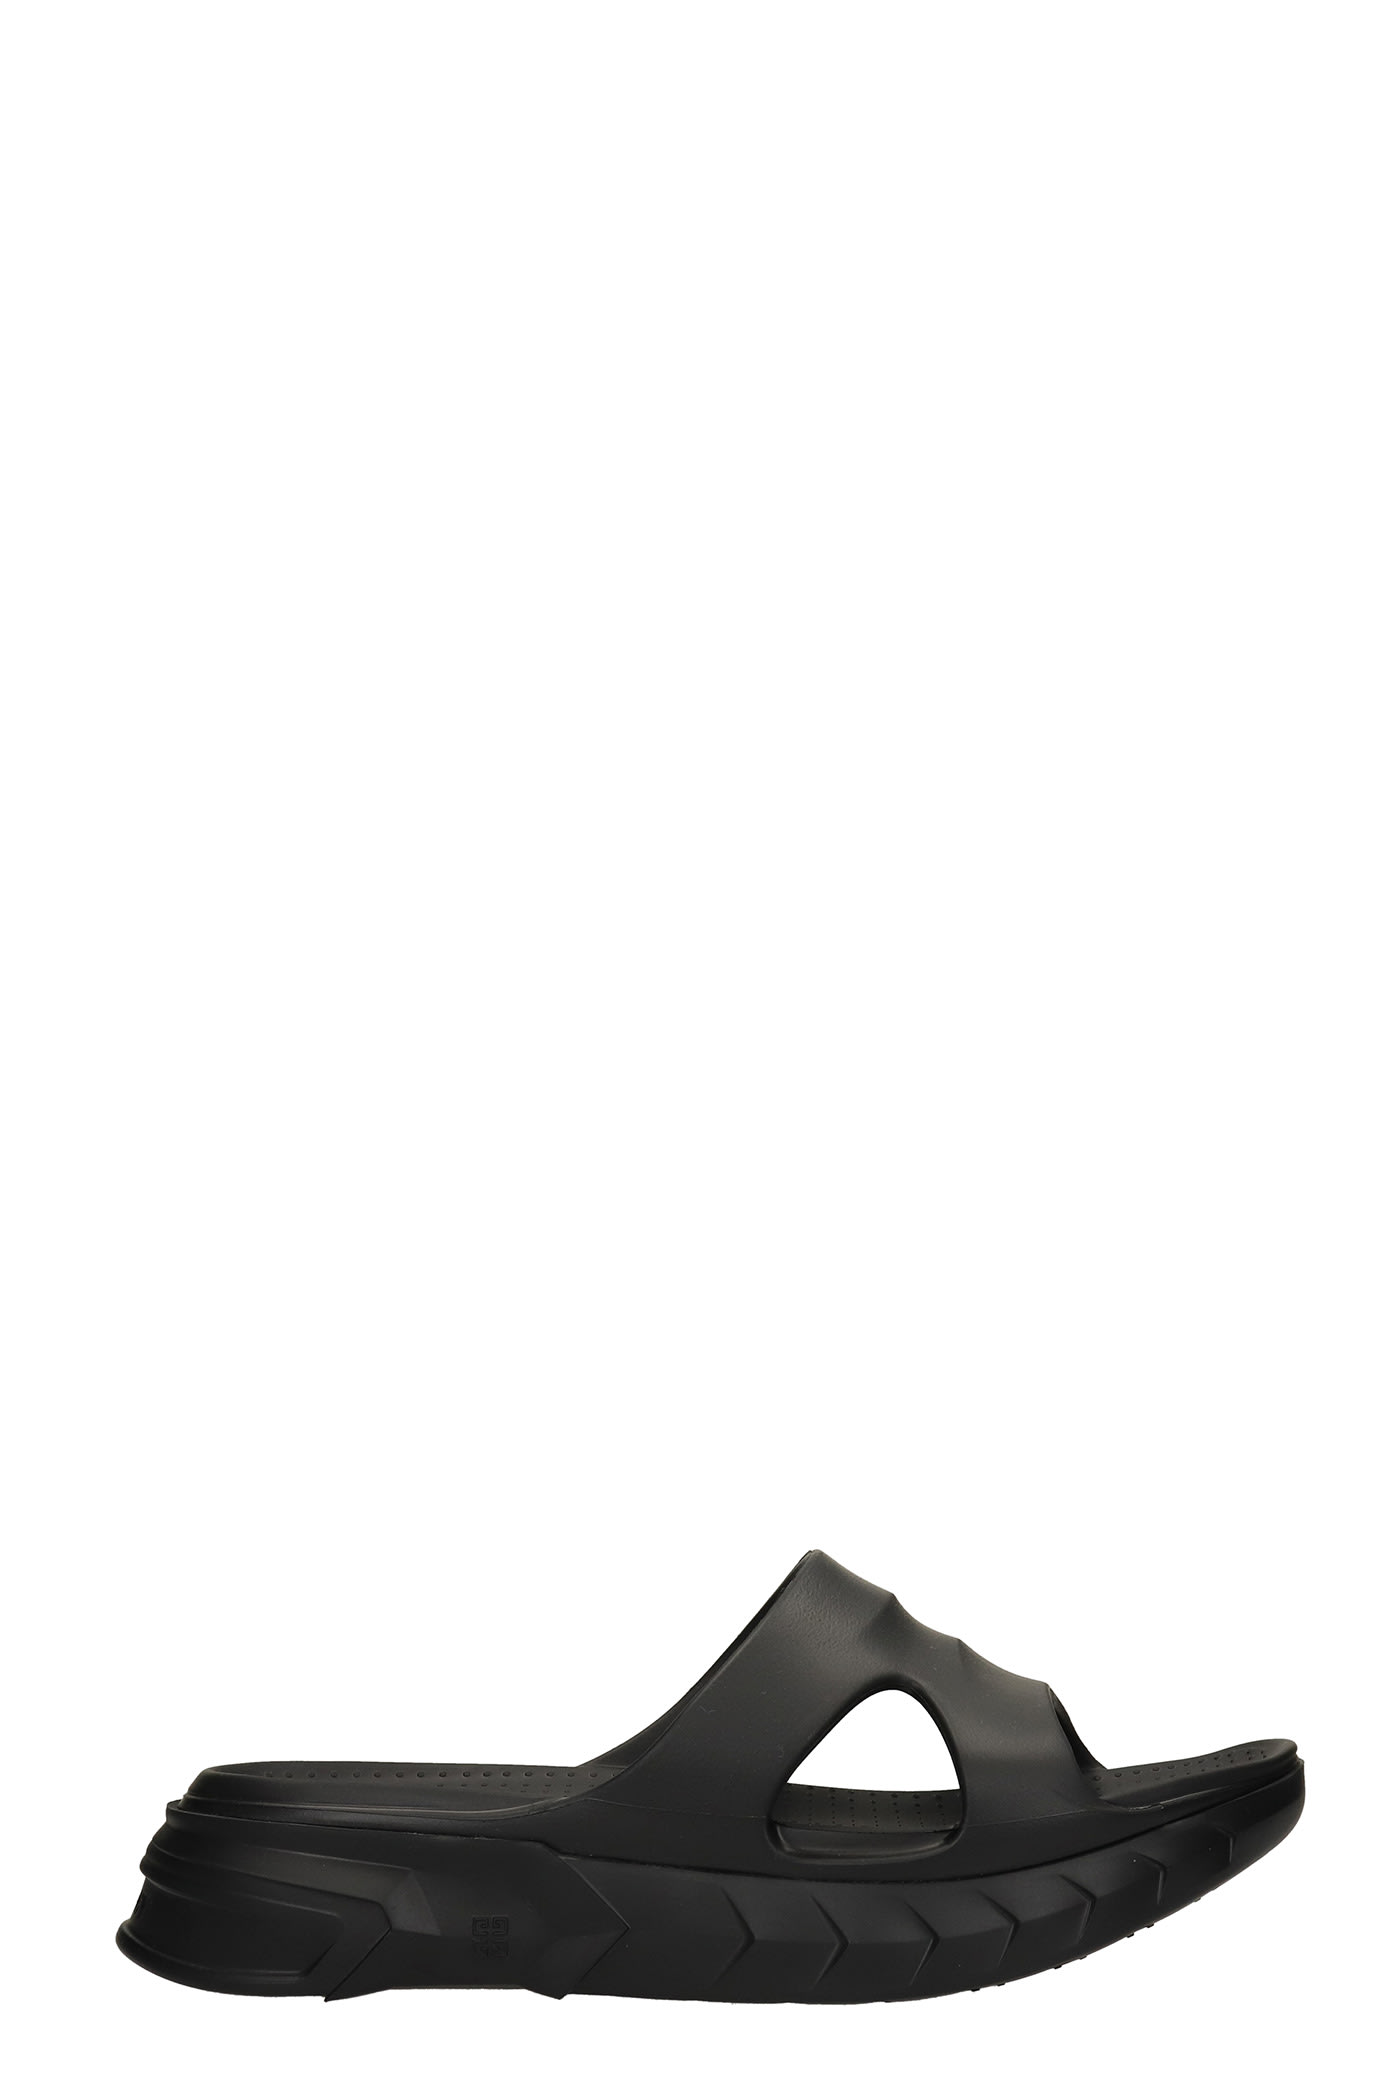 Givenchy Marshmallow Slide Flats In Black Rubber/plasic